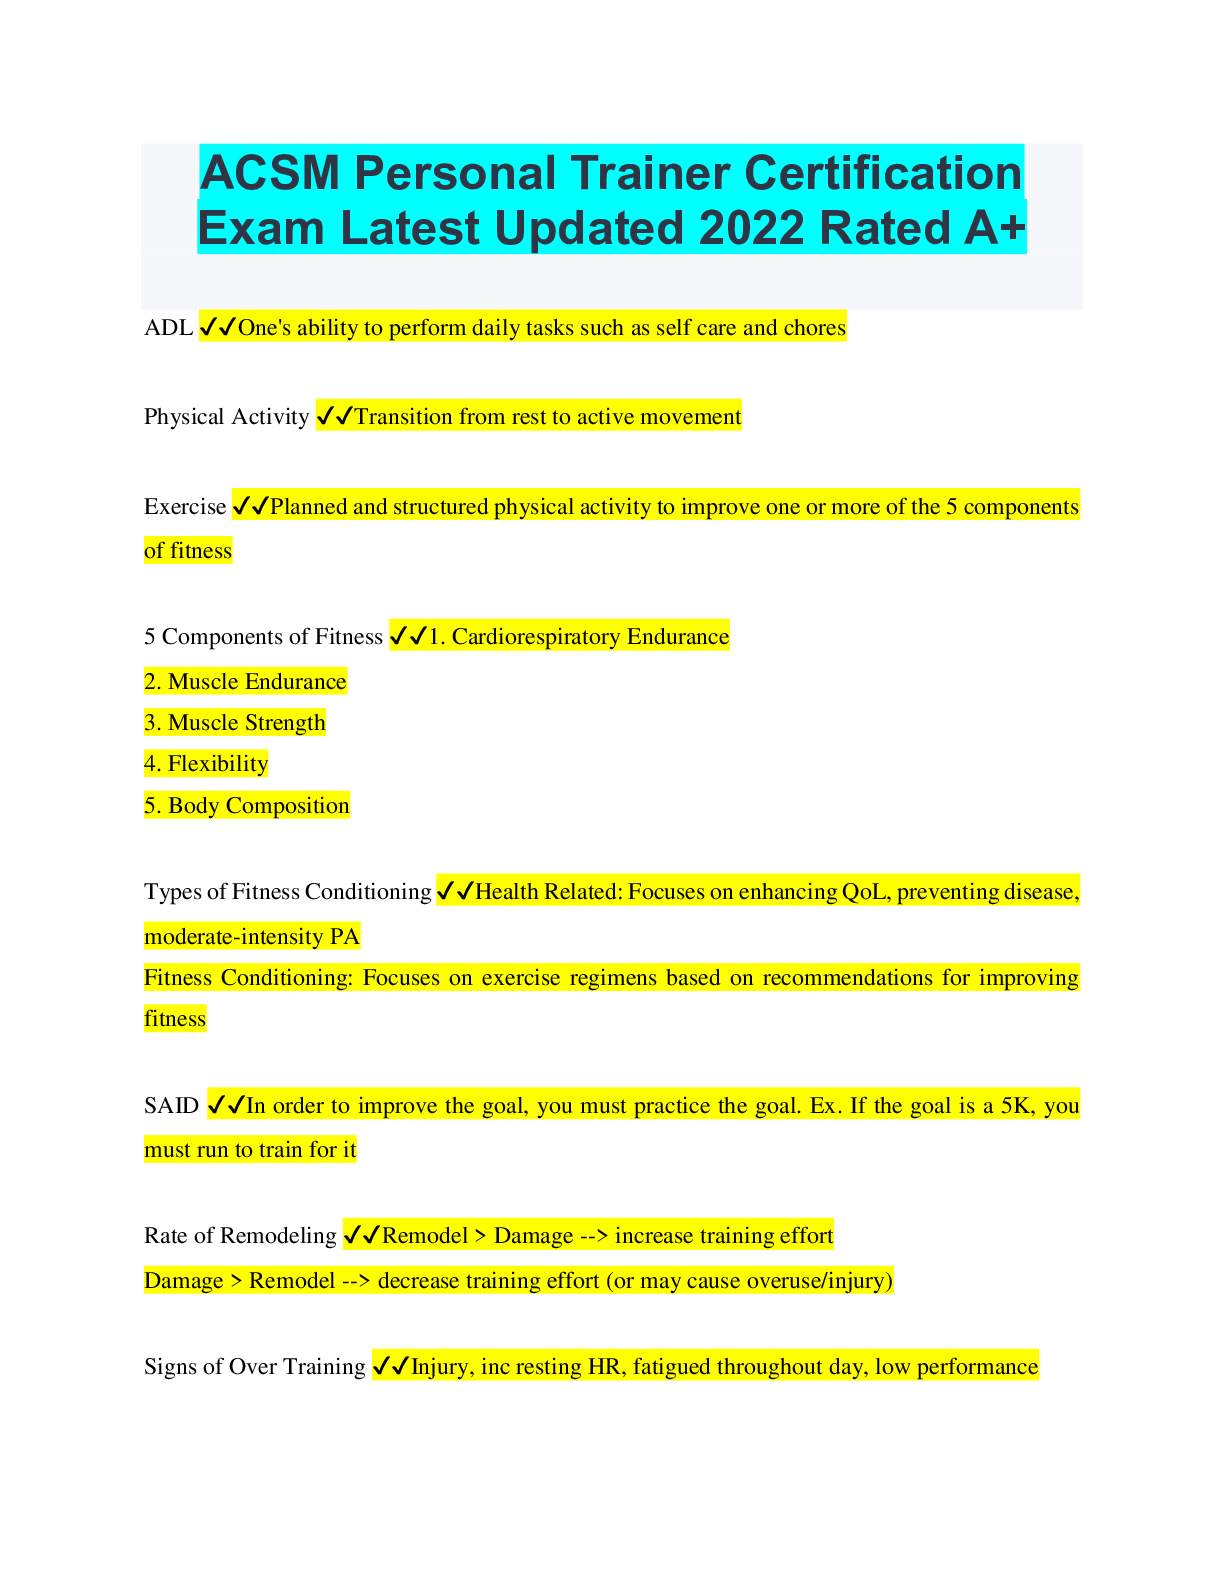 ACSM Personal Trainer Certification Exam Latest Updated 2022 Rated A+